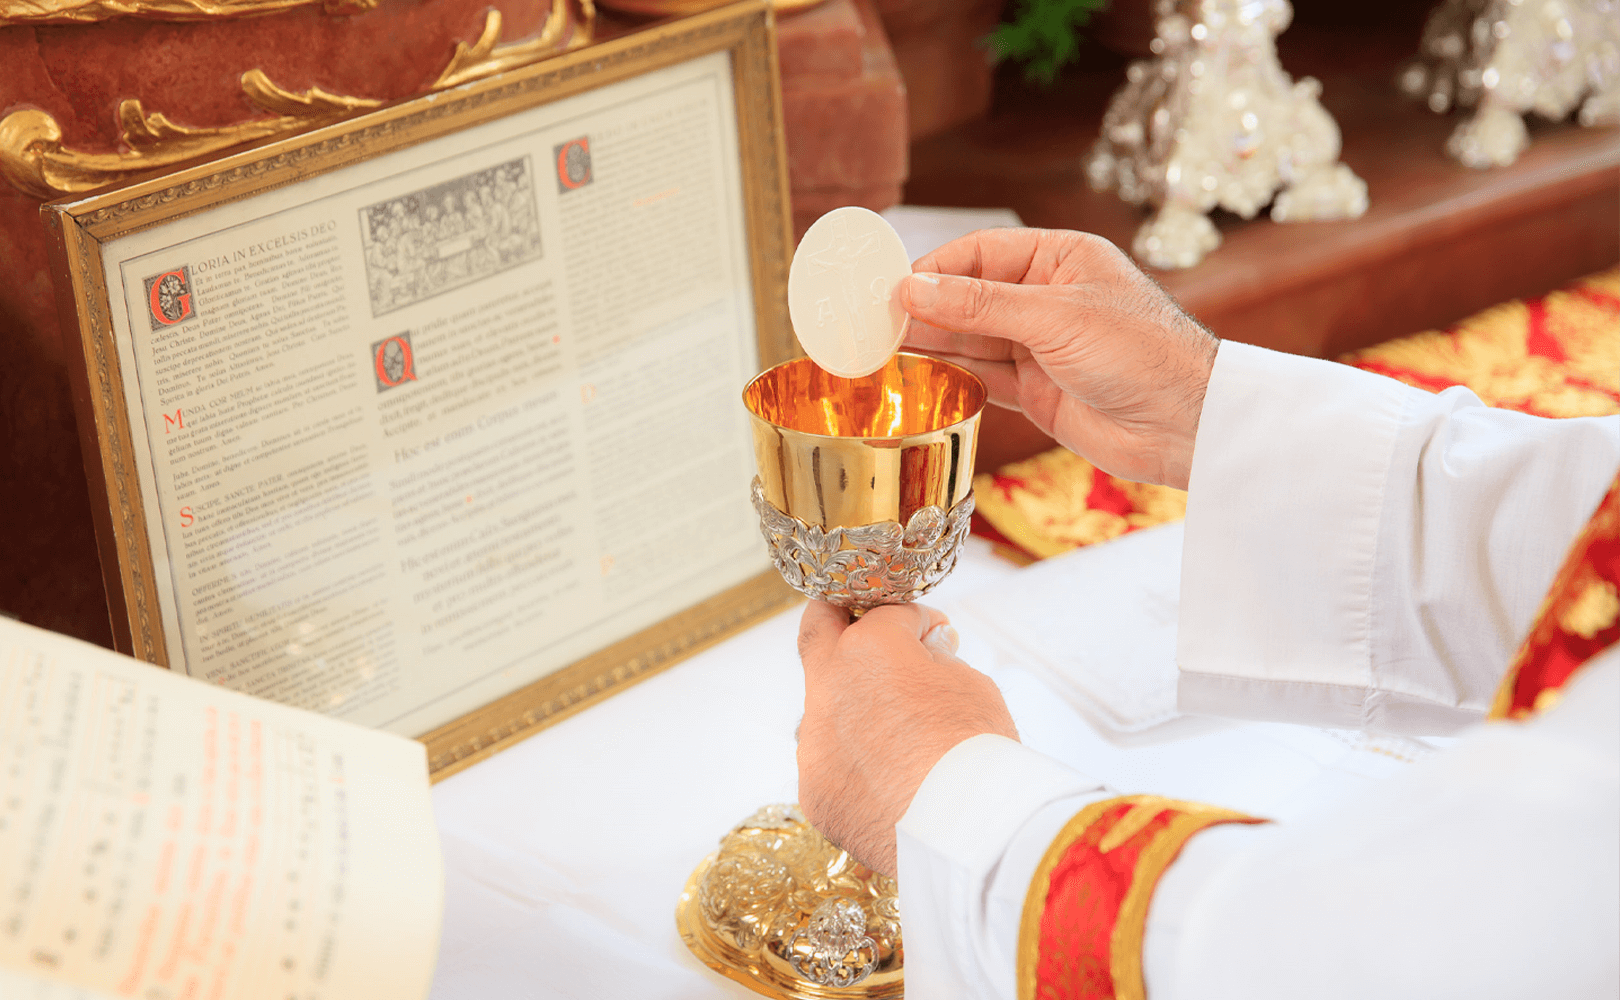 Why I Couldn’t Go Back… to the Novus Ordo